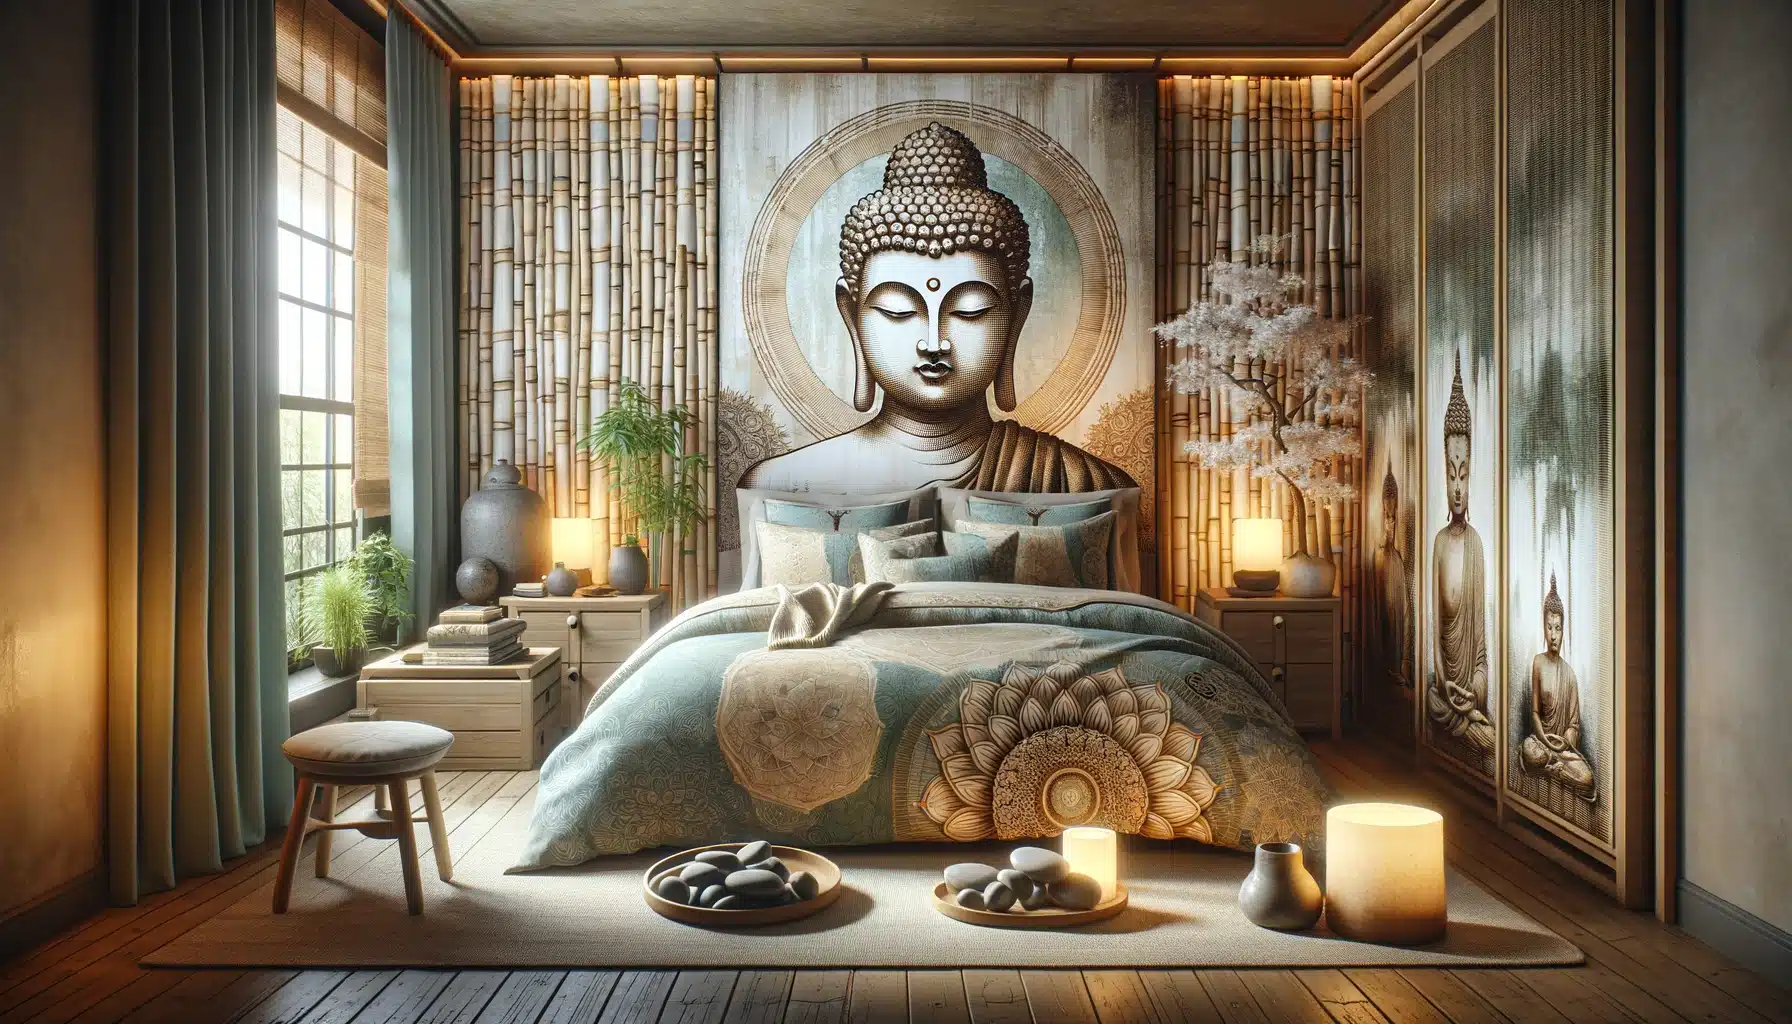 A serene and spacious bedroom designed as a tranquil sanctuary, featuring Buddha bedding. The bed is adorned with a peaceful, stylized depiction of Buddha, surrounded by symbols like the lotus flower, the Bodhi tree, and Dharma wheels. The room embraces a Zen decor aesthetic, with soft, natural lighting, and minimalistic furnishings. Enhancing the peaceful ambiance are accessories such as a small indoor waterfall, bamboo plants, and stone pebbles. The room's color scheme includes earth tones with accents of serene blues and greens, creating a cohesive and calming environment ideal for relaxation and inner peace.